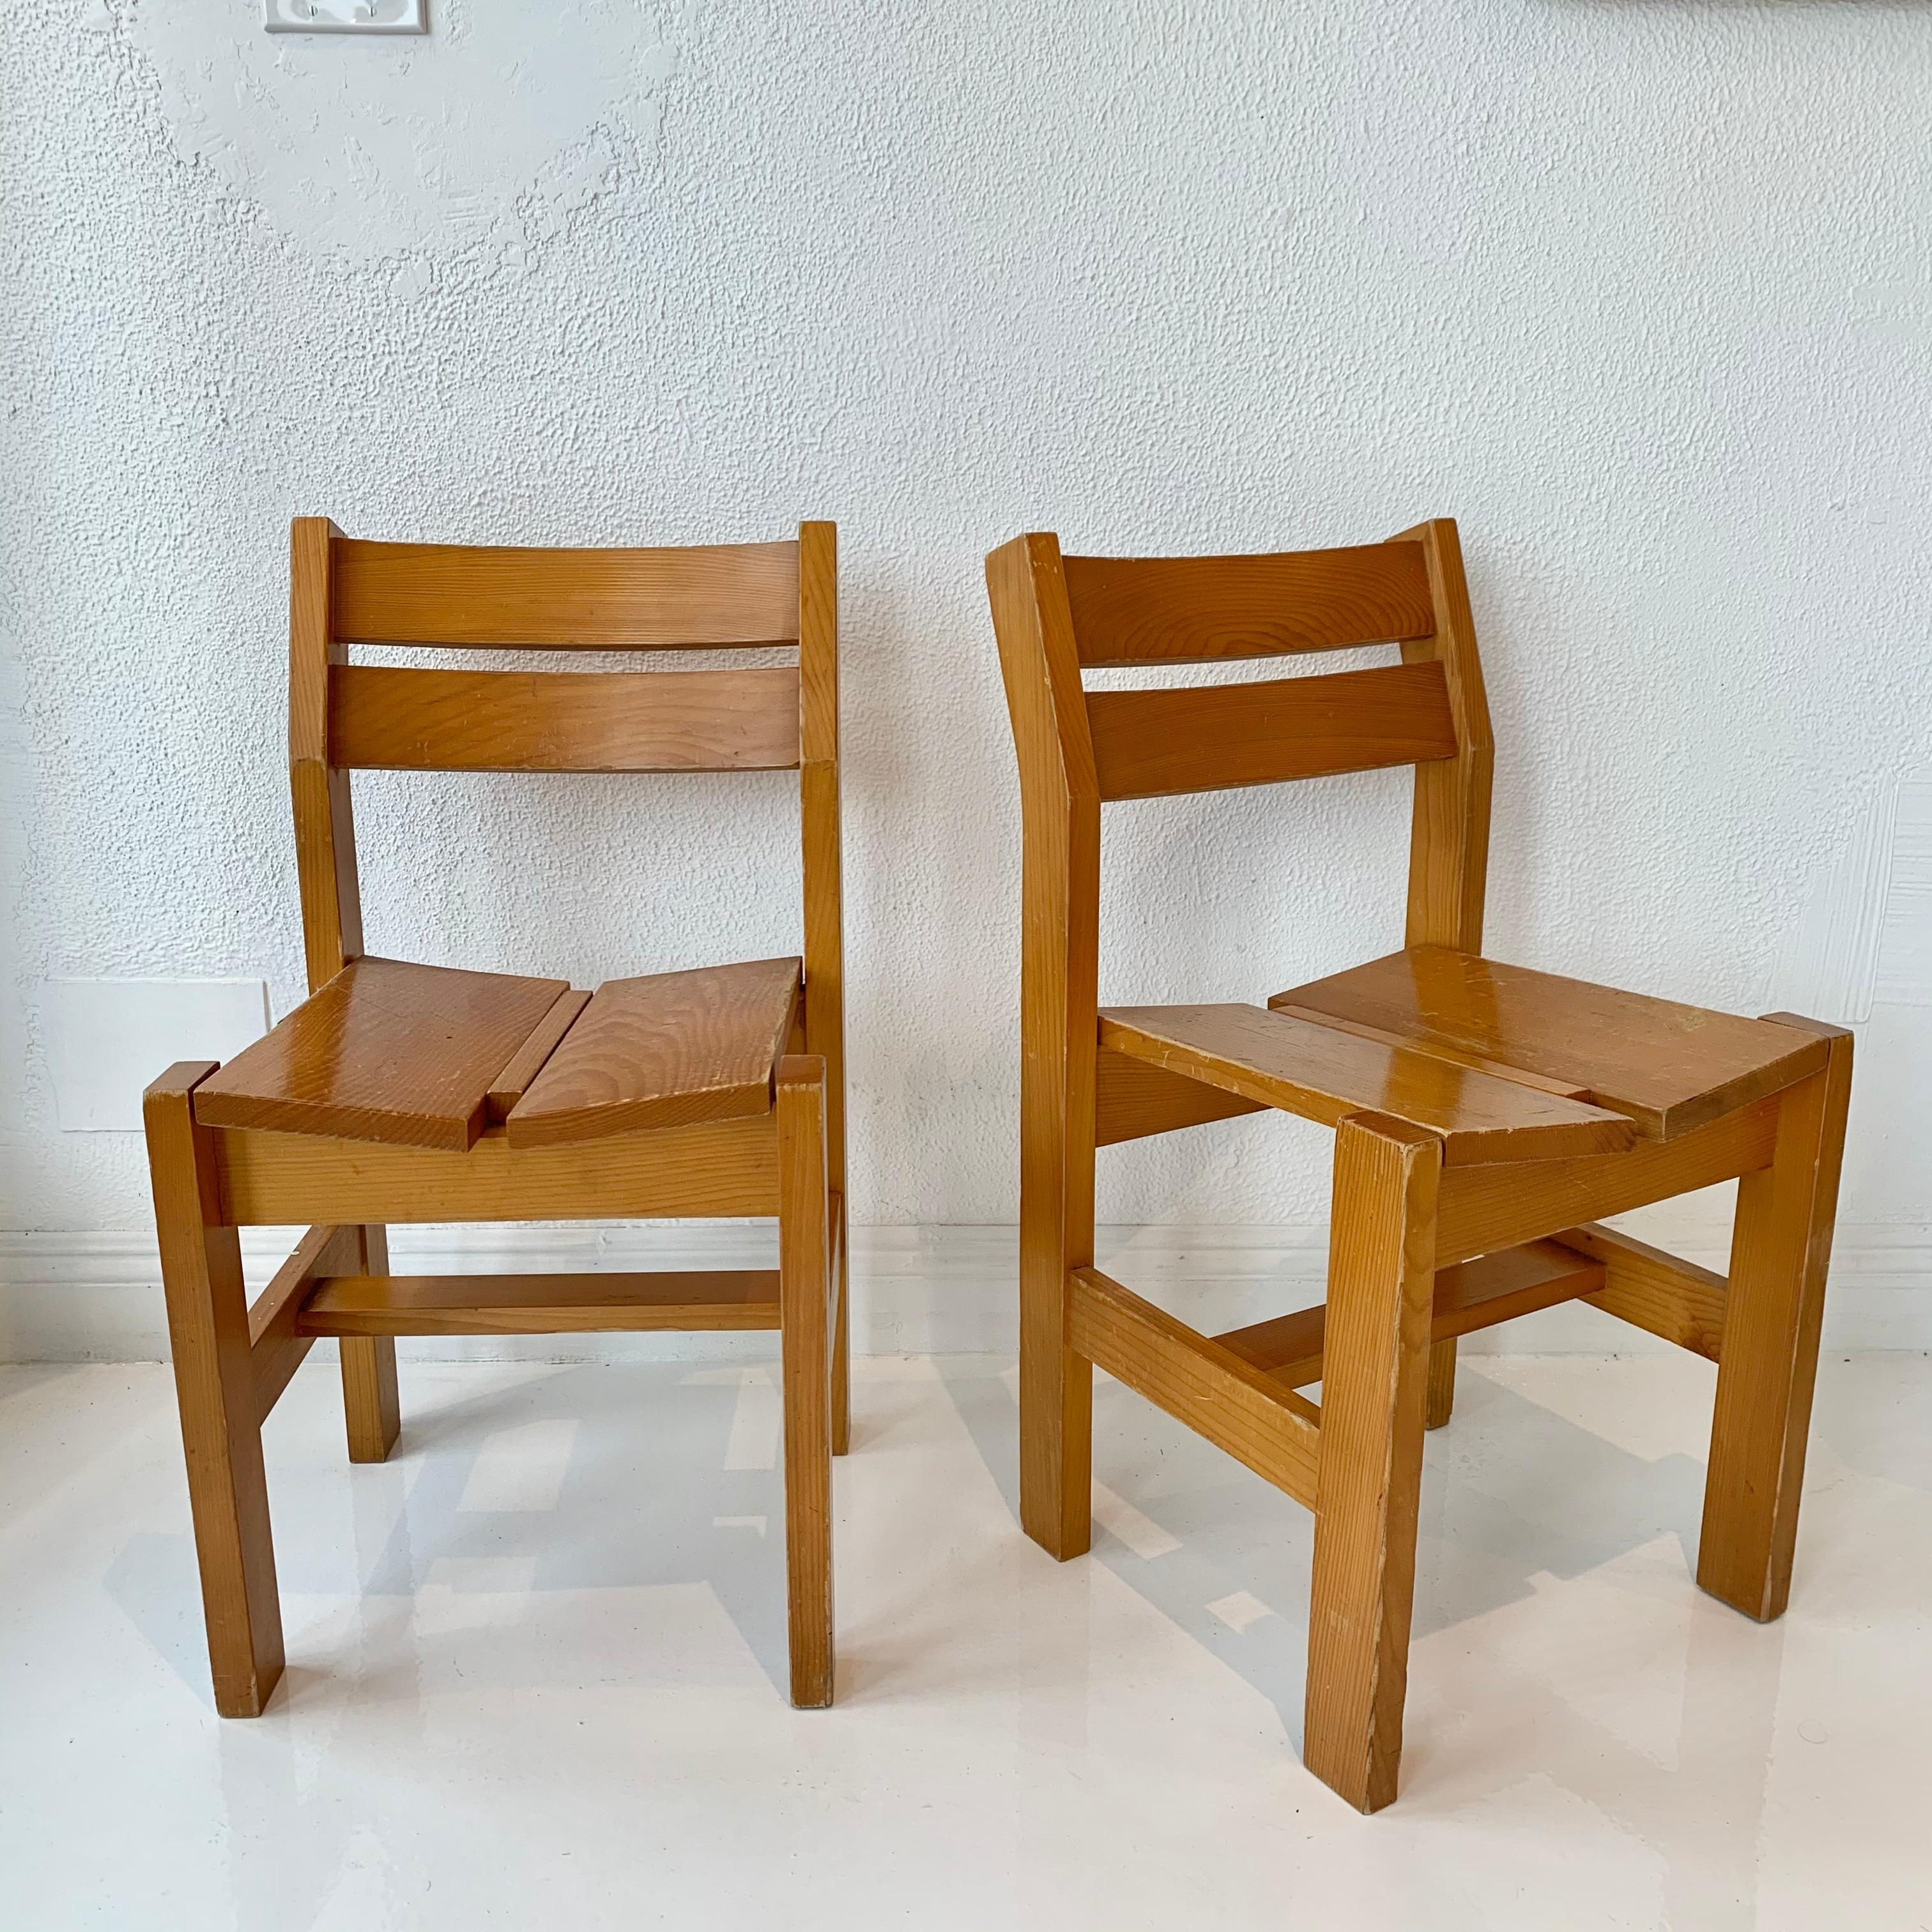 Rare set of chairs by Charlotte Perriand. Chairs were designed for La Cascade, the grouping of tilted apartments at Les Arcs 1600 ski resort. Made in the mid-1960s Perriand designed all aspects of the lodgings at the ski resorts, from the building